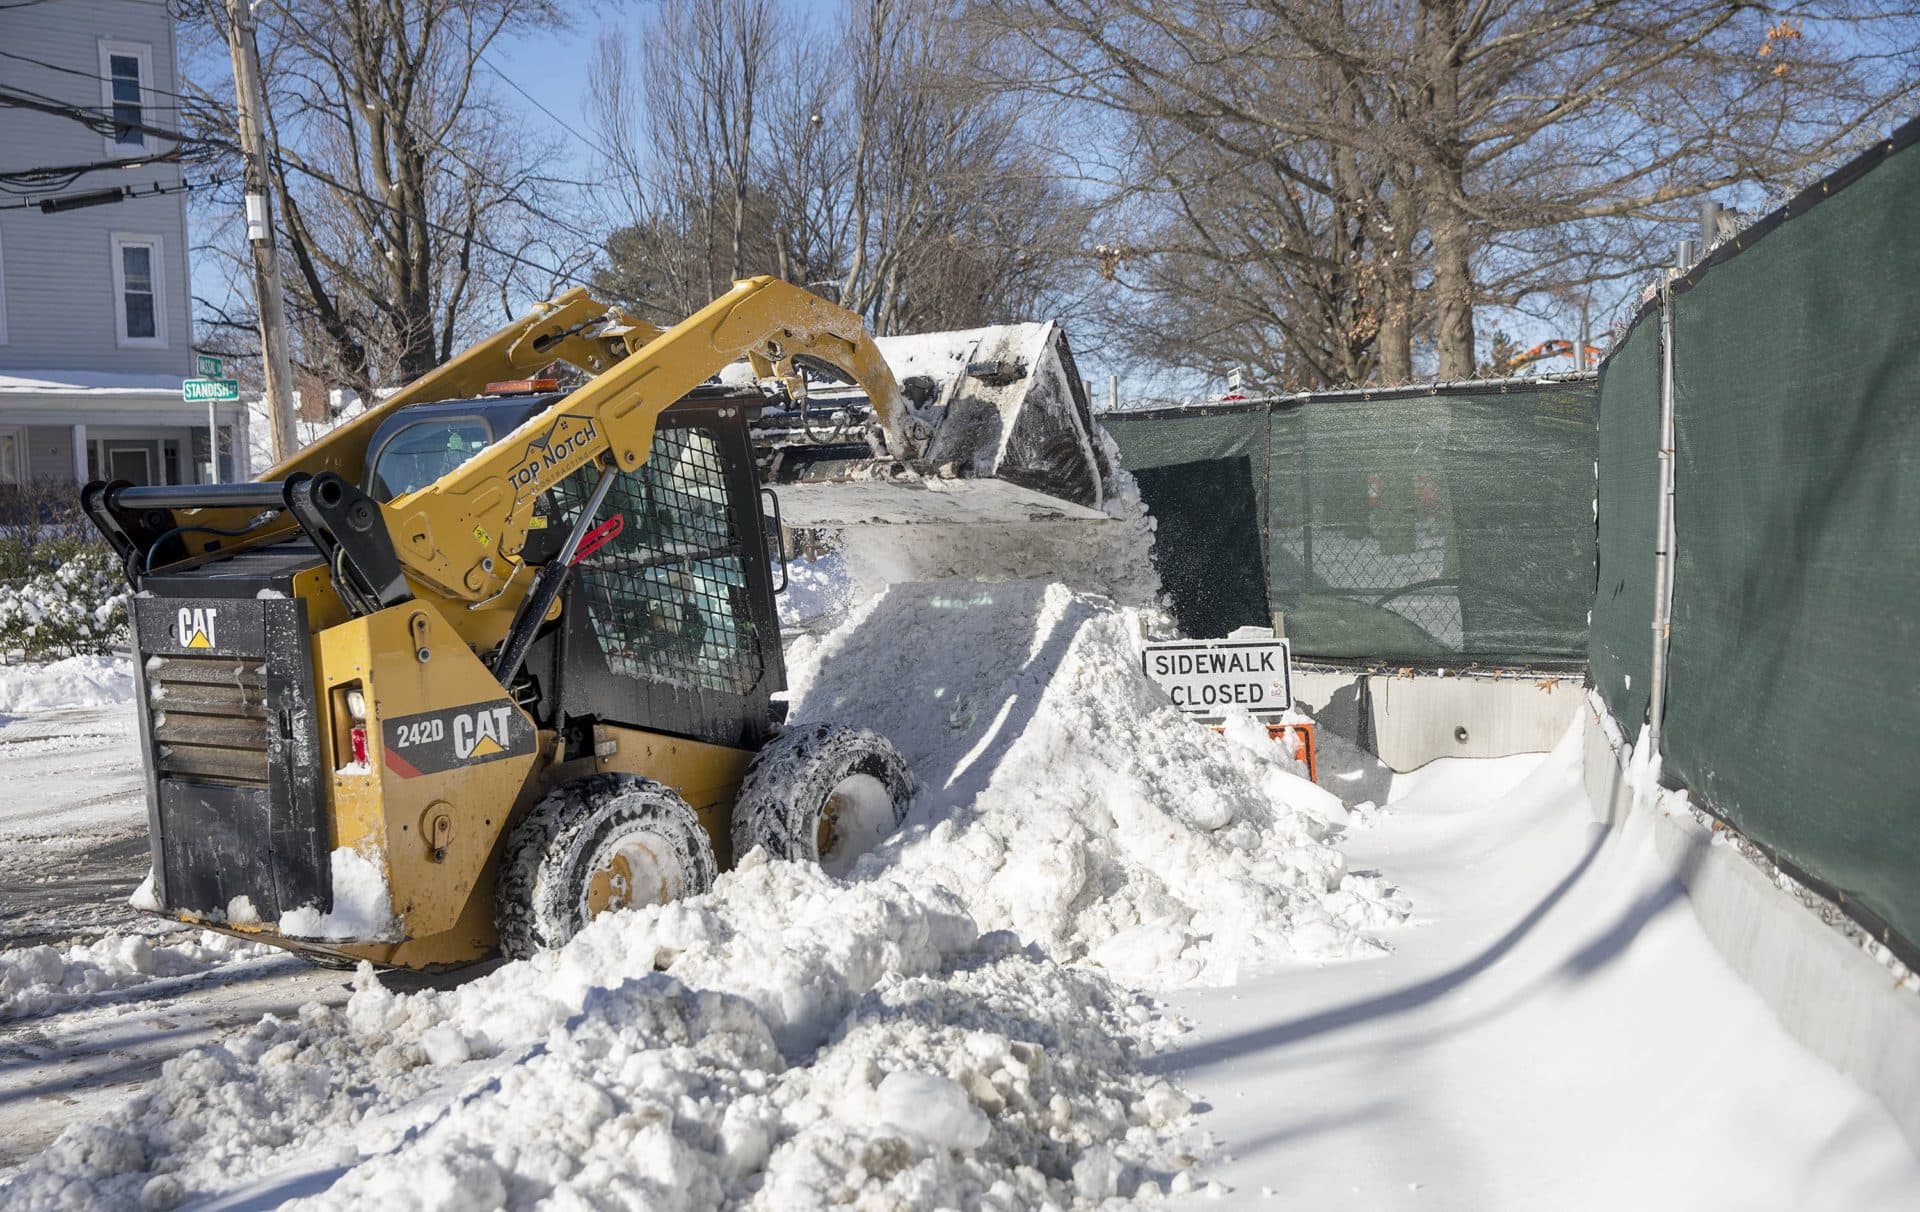 A skid-steer loader moves snow off the streets in Cambridge. (Robin Lubbock/WBUR)